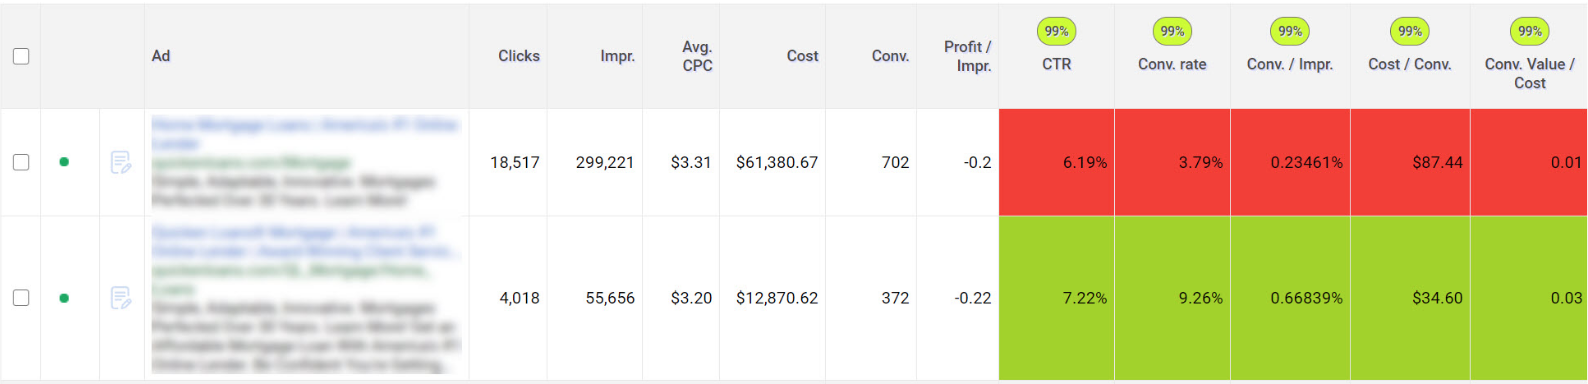 A/B tests results for PPC ads